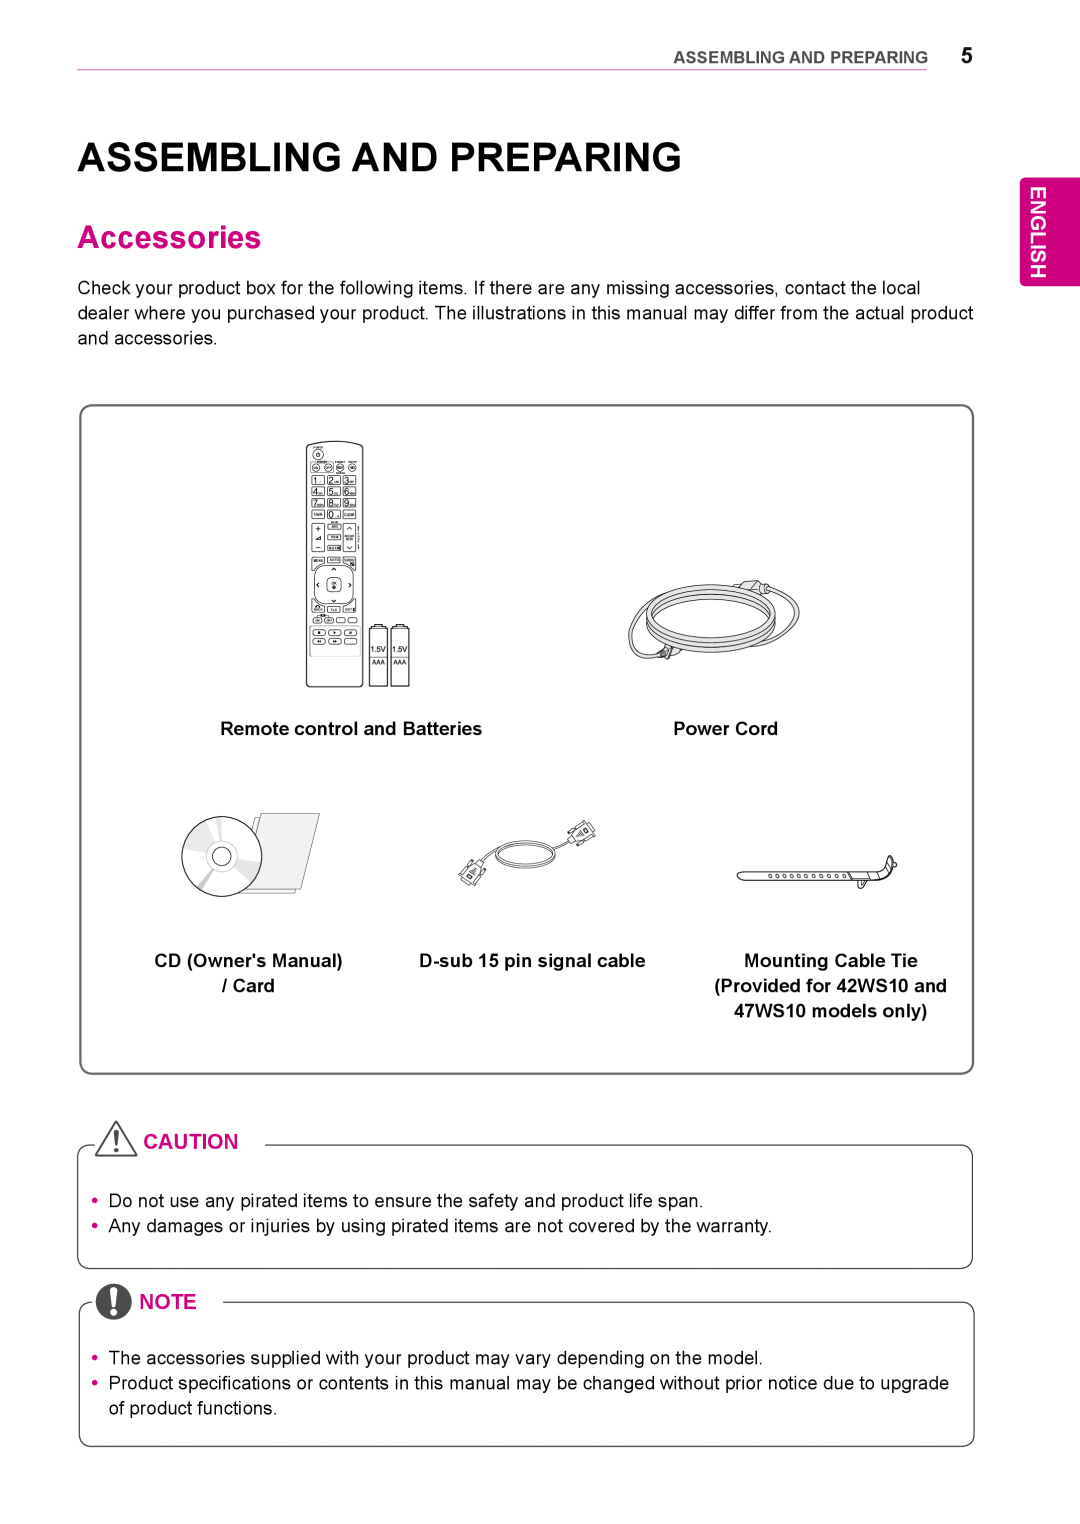 LG Electronics 55WS10, 42WS10, 47WS10 owner manual Assembling And Preparing, Accessories, English 